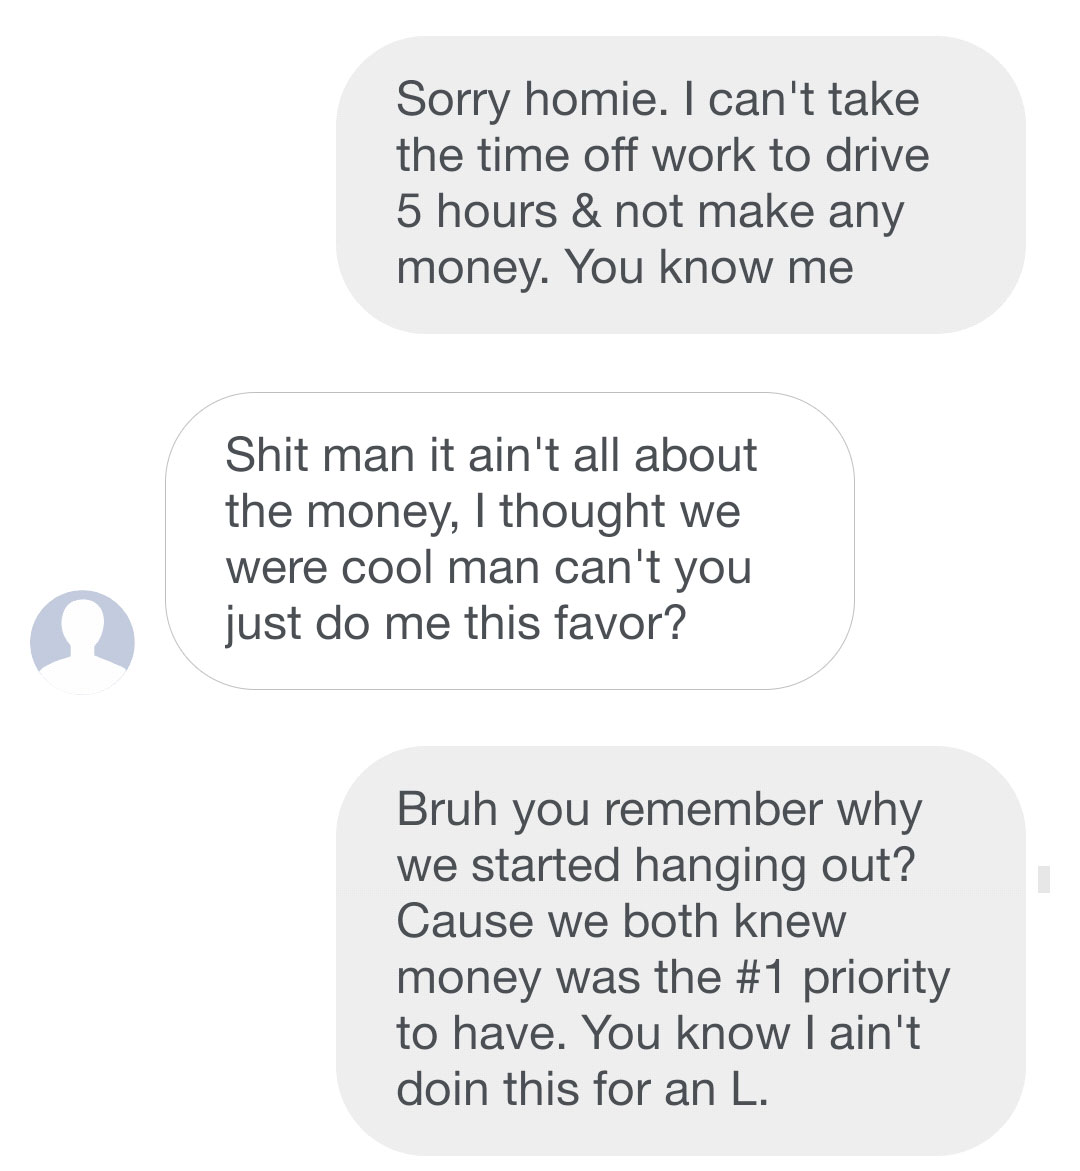 Frat Bro Plans to Book a Rapper and Take $550 of the Fee